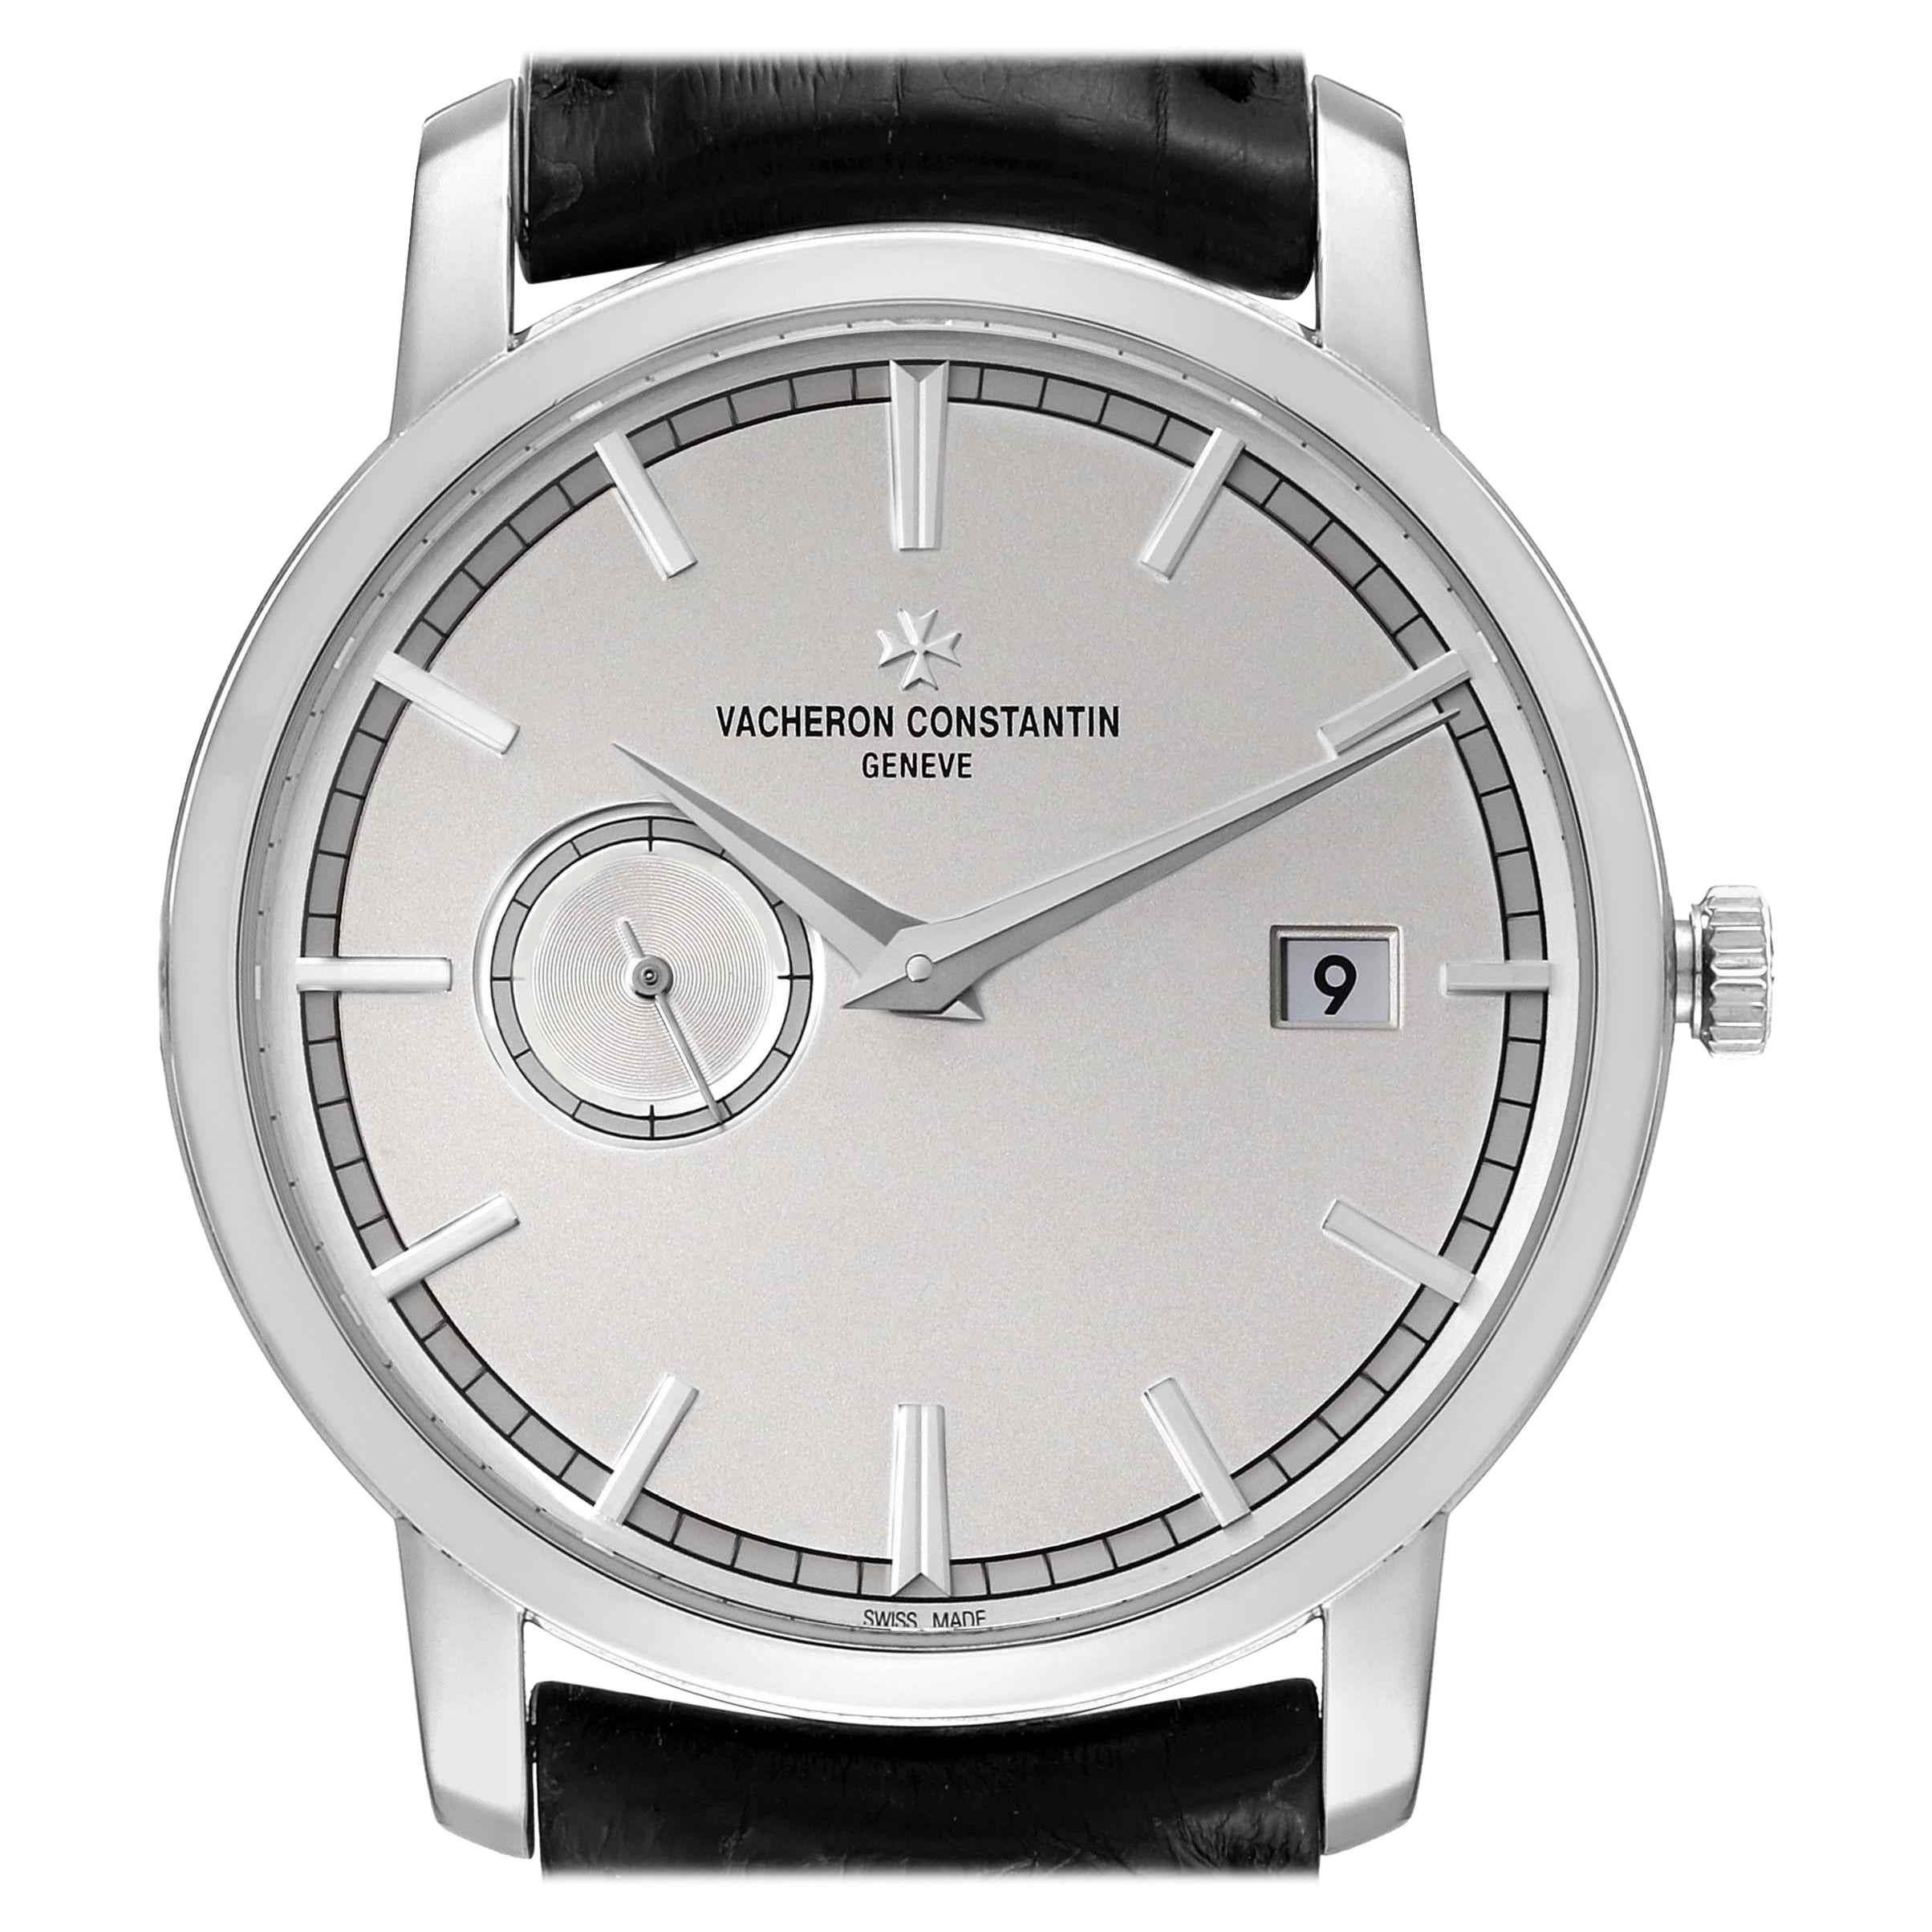 Vacheron Constantin Traditionnelle White Gold Mens Watch 87172 Box Papers